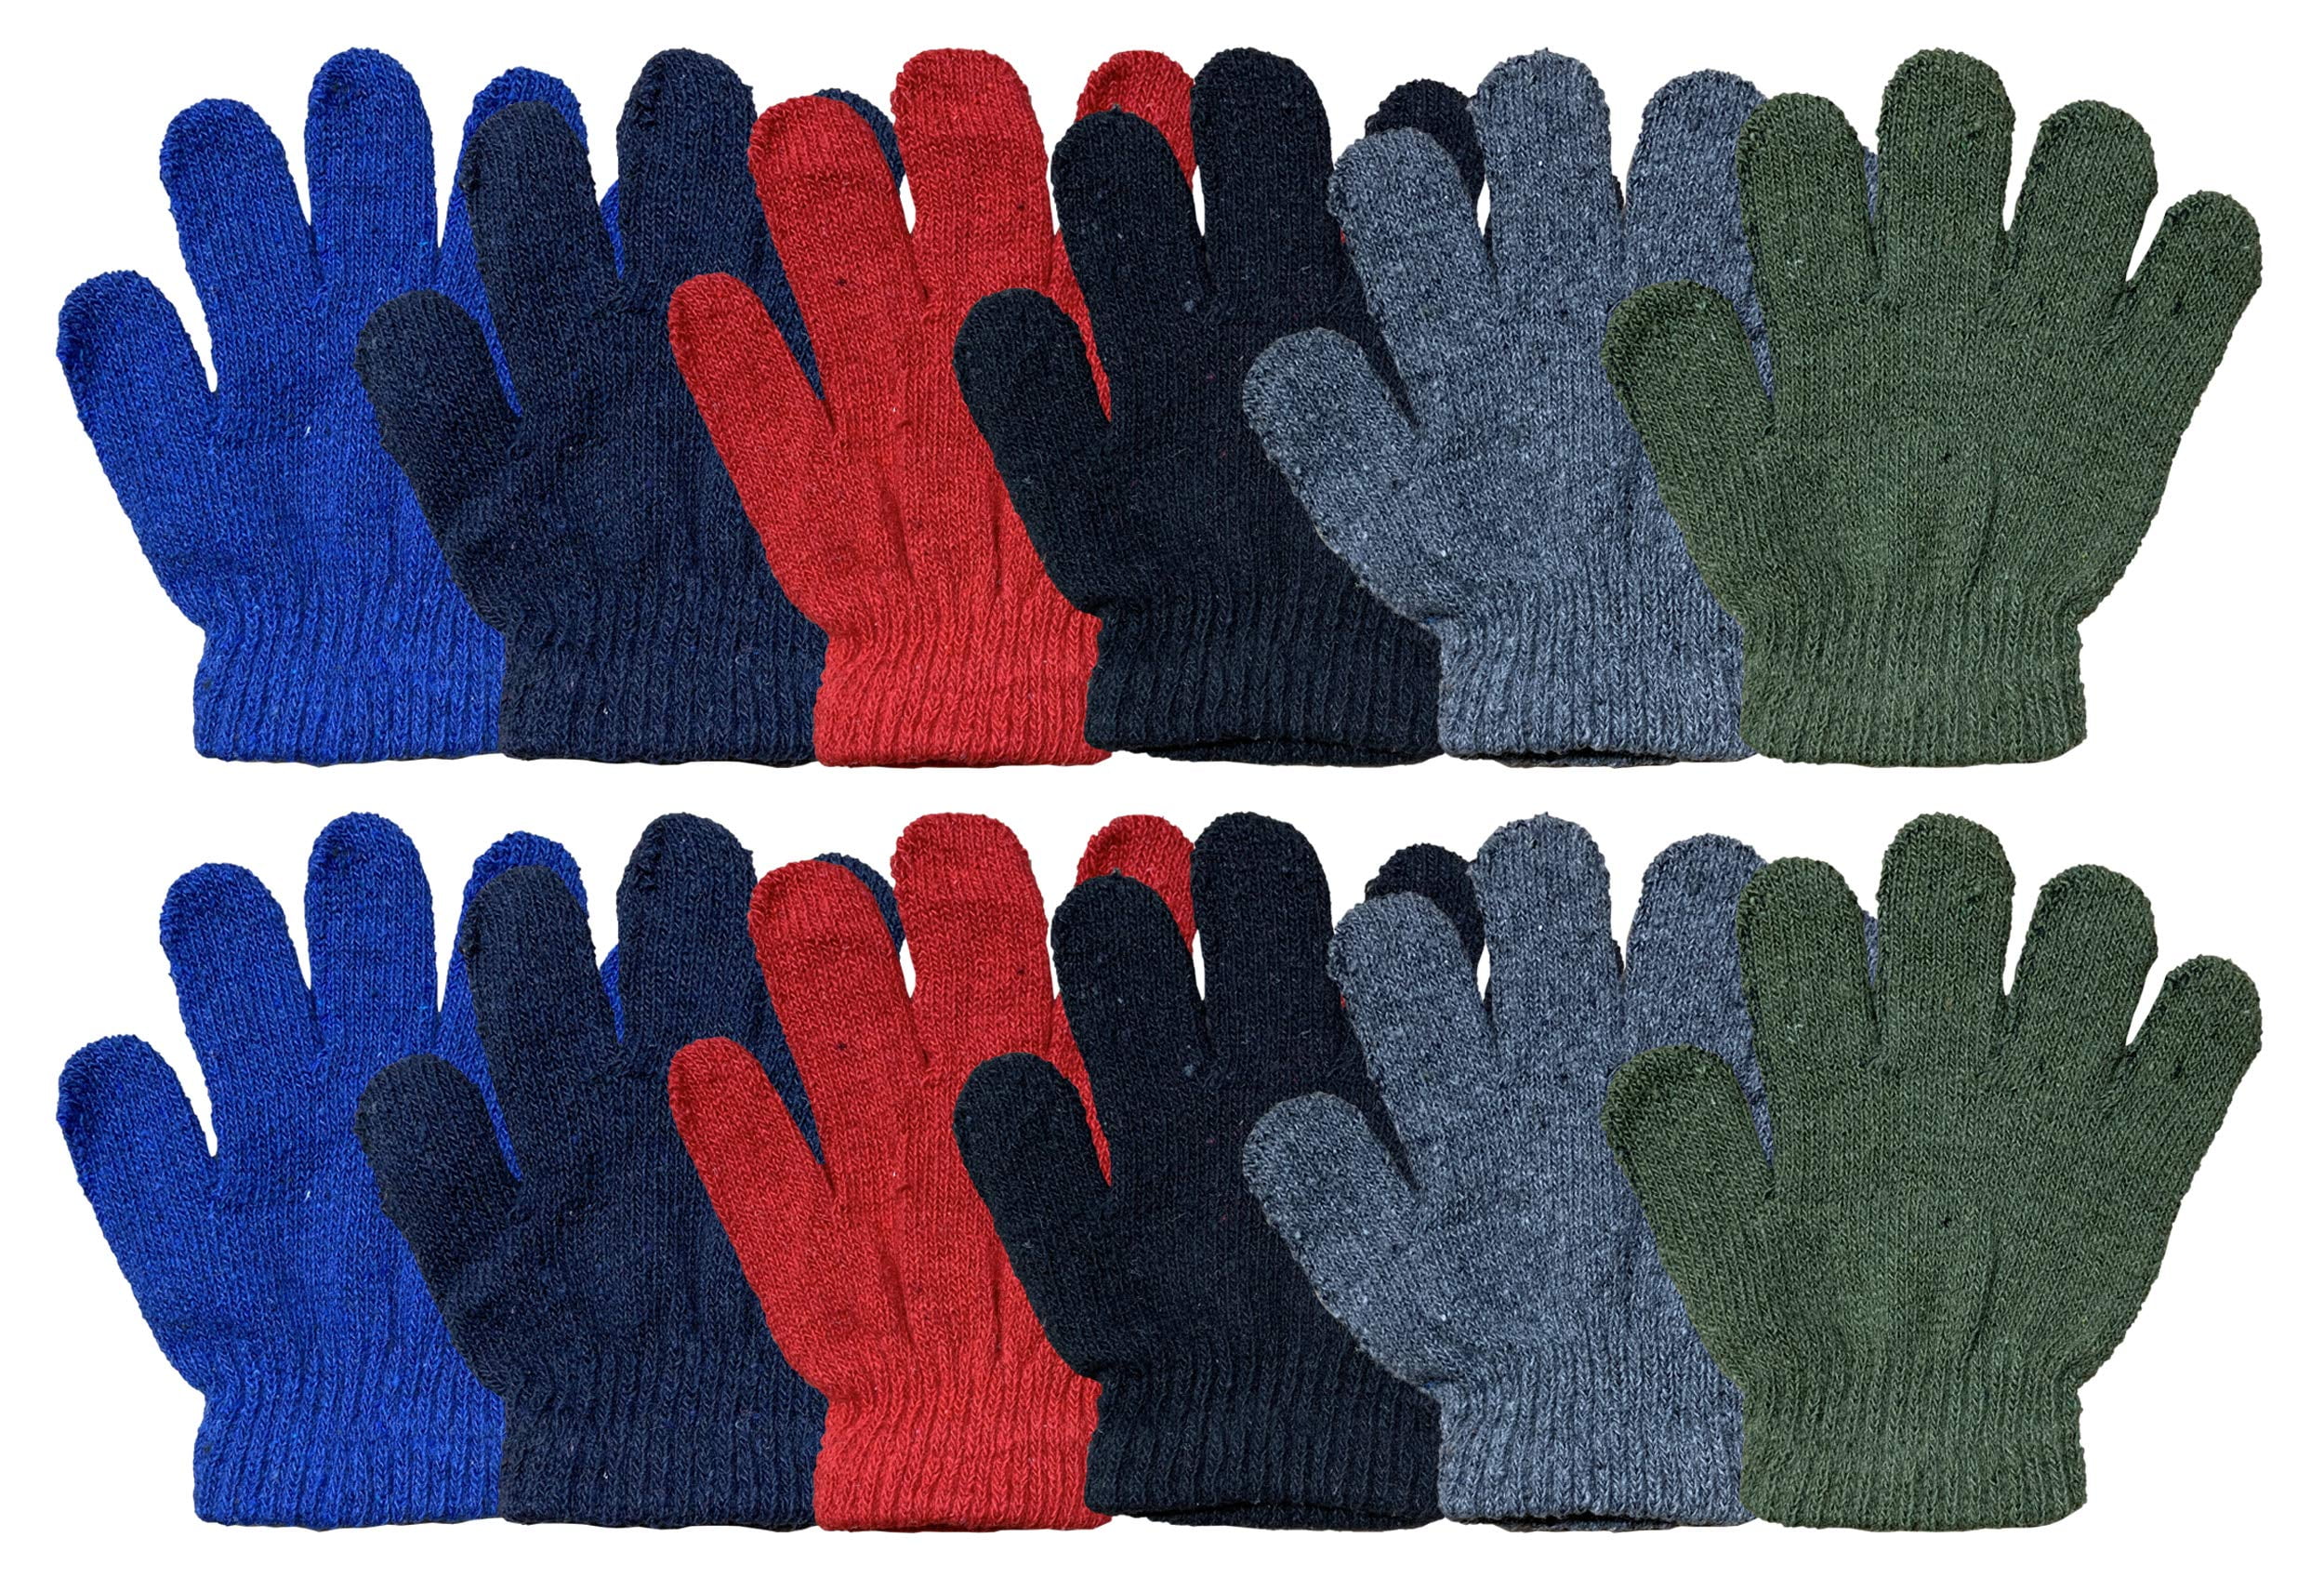 Yacht & Smith 12 Pairs Childrens Solid Colored Gloves and Striped Colorful  Mittens, Ages 3-8. Kids, Bulk (12 Pairs Striped Mittens Black/Color)